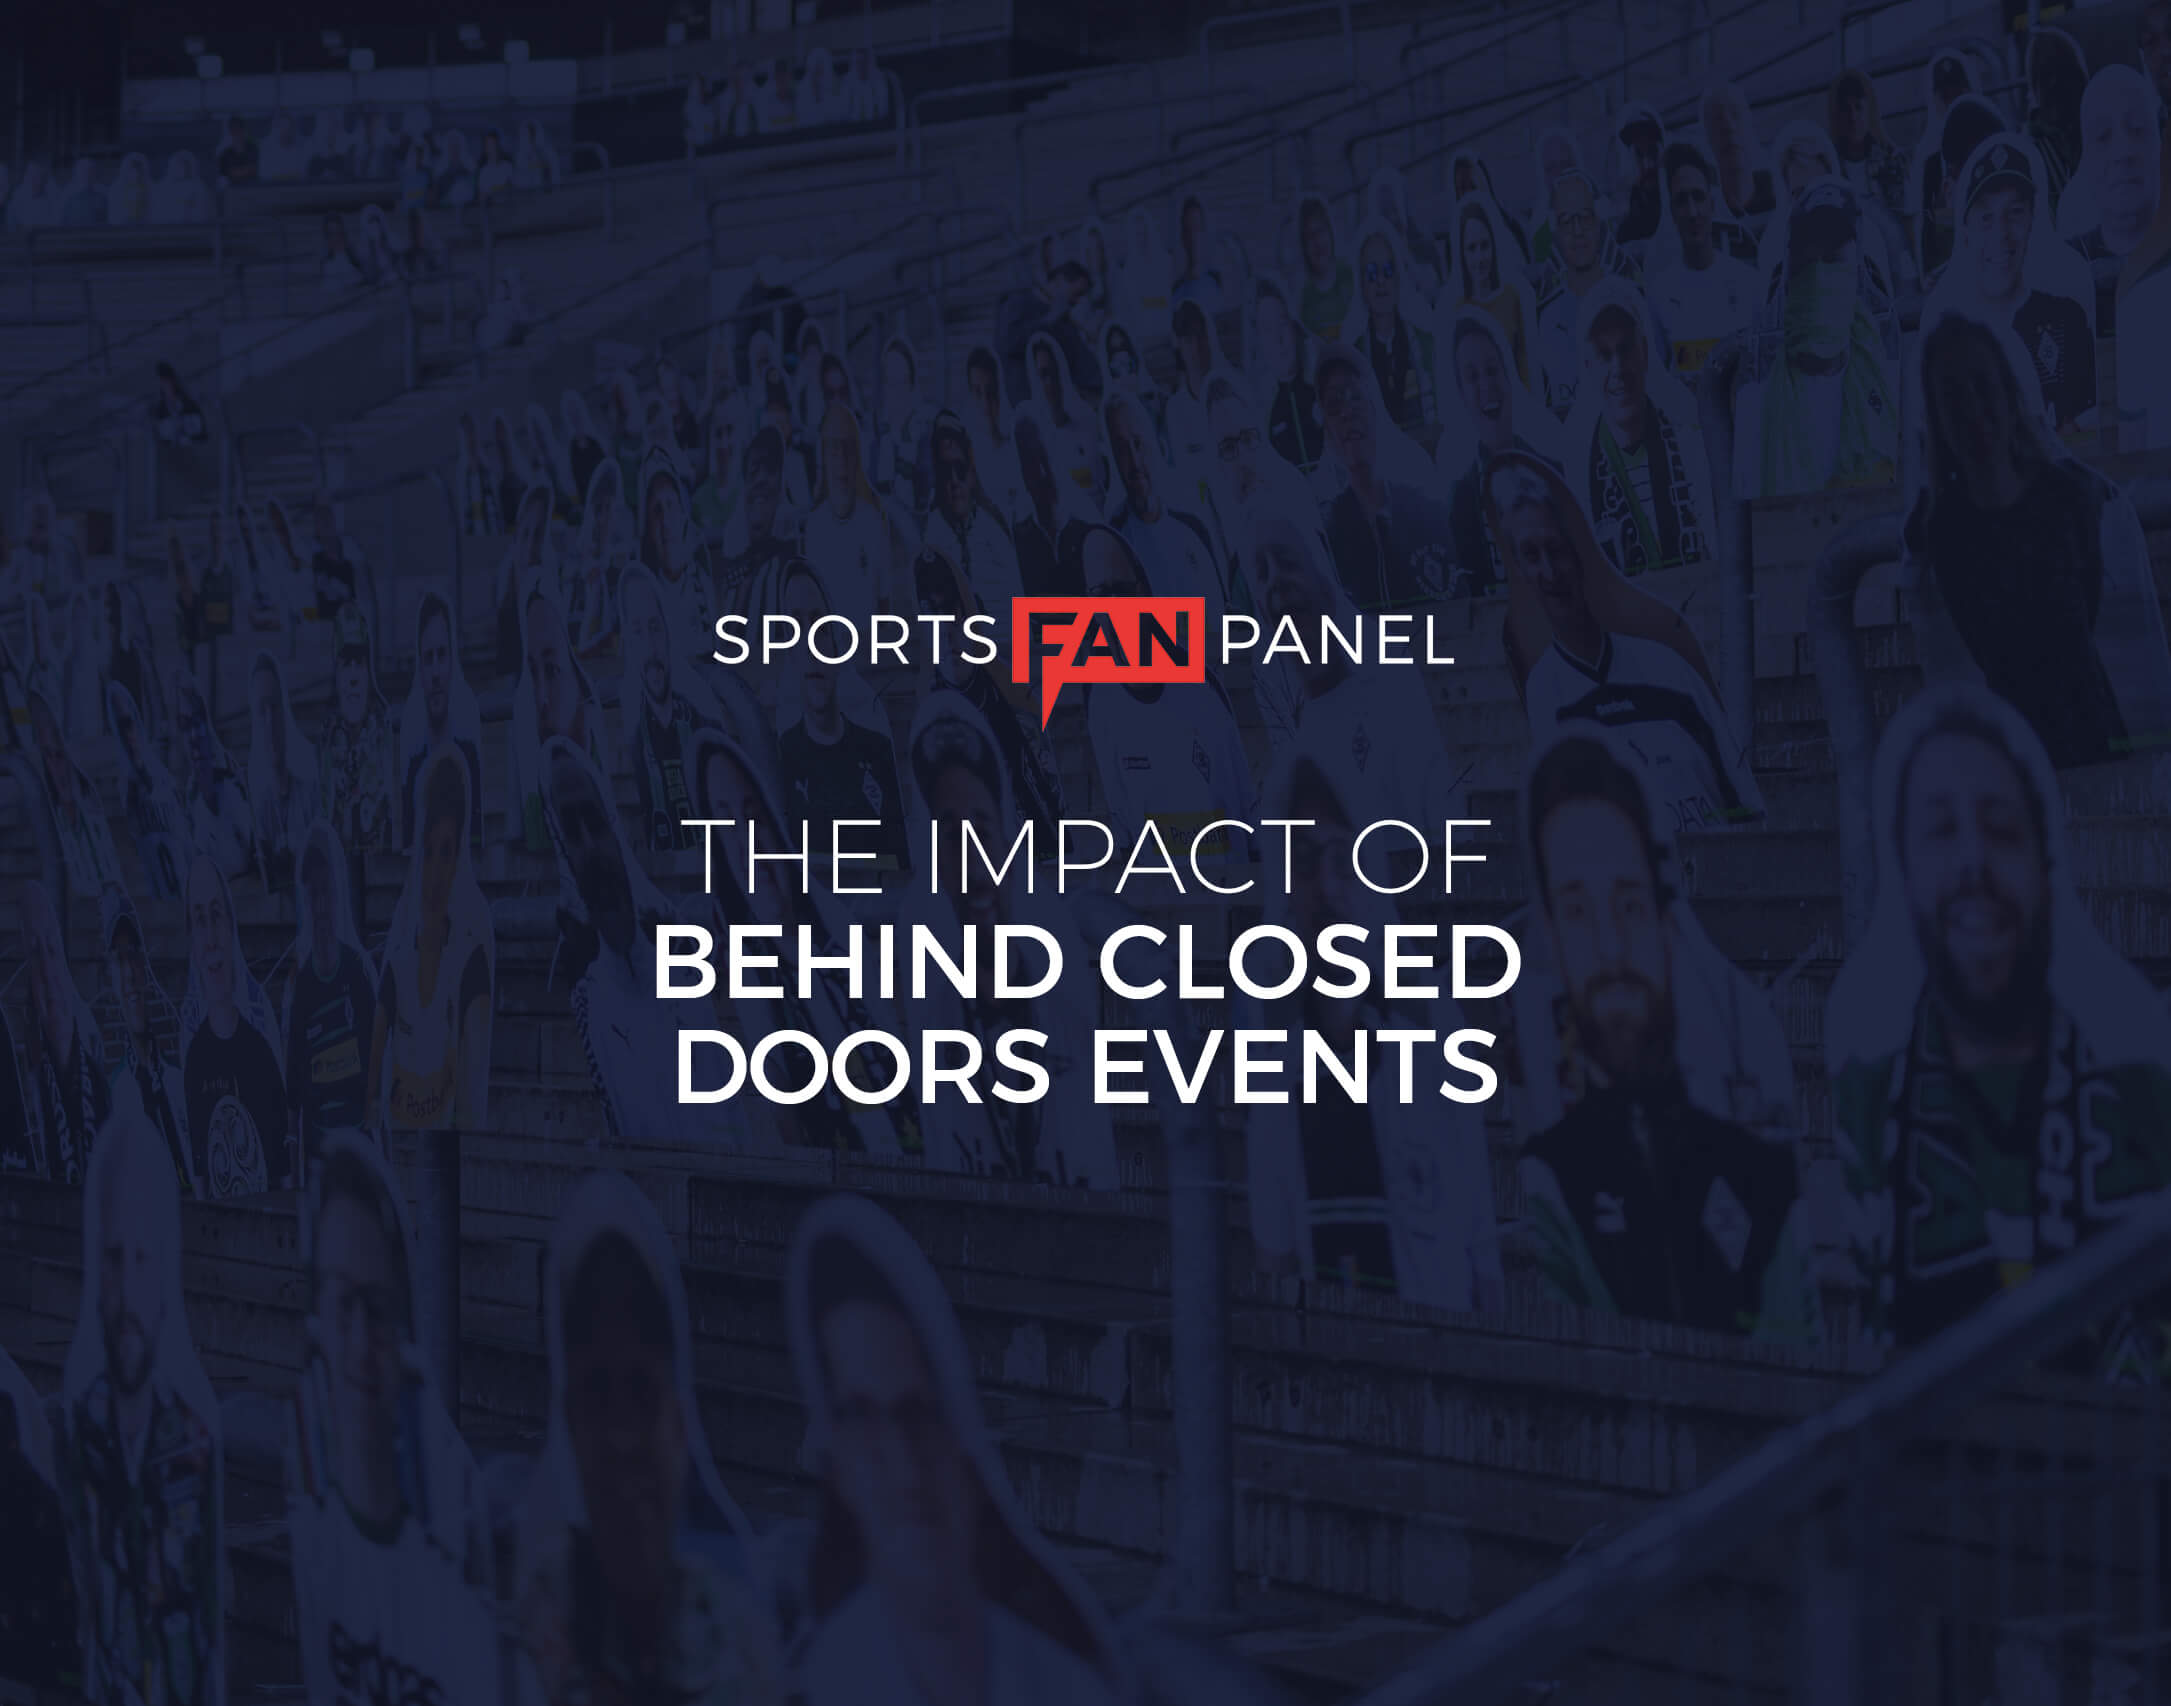 Sport from behind closed doors – The fan story so far